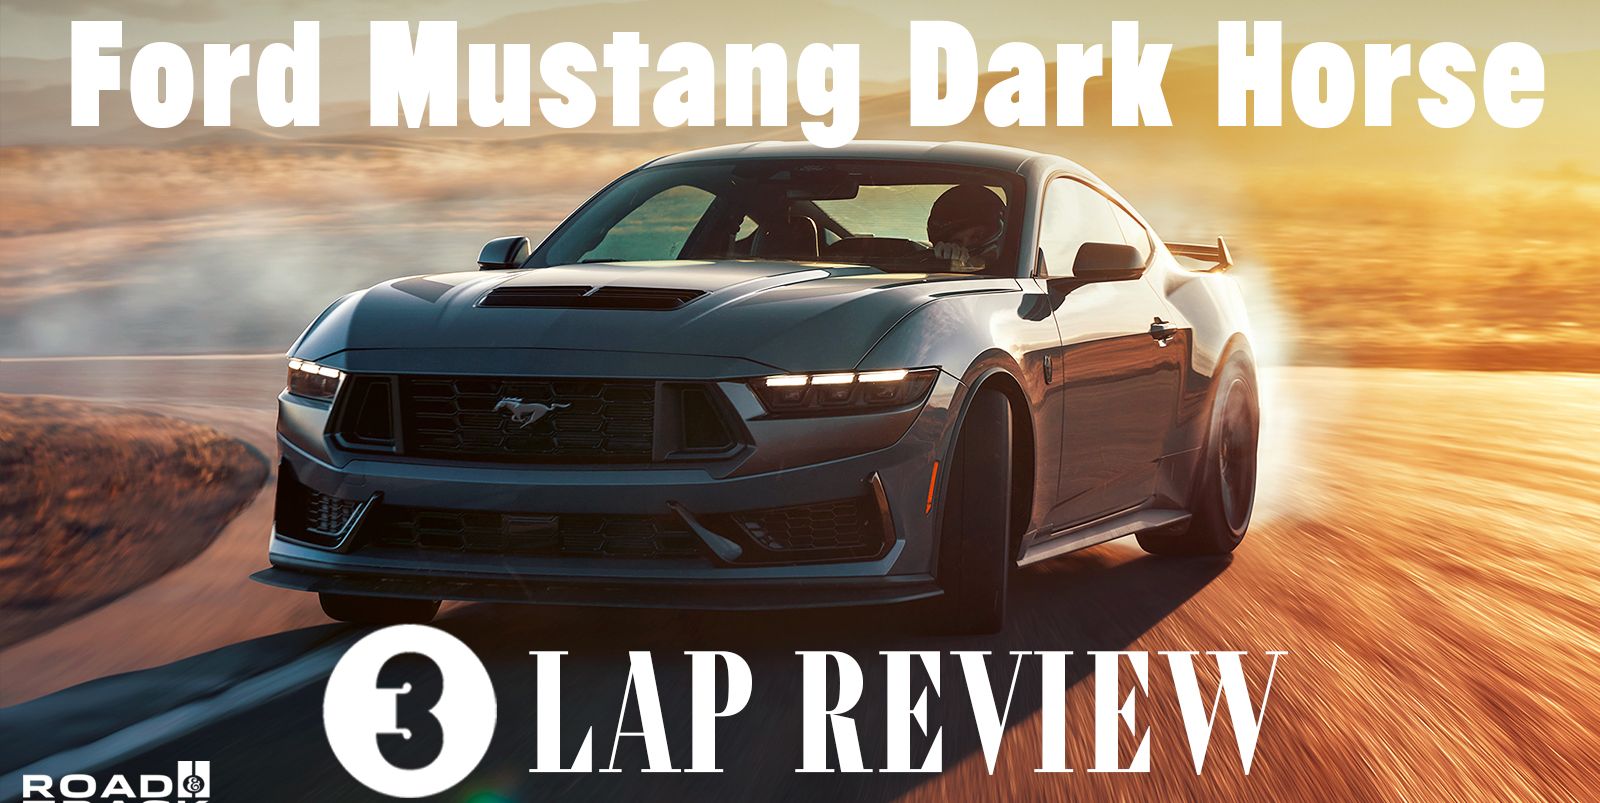 There's So Much to Like About the Ford Mustang Dark Horse